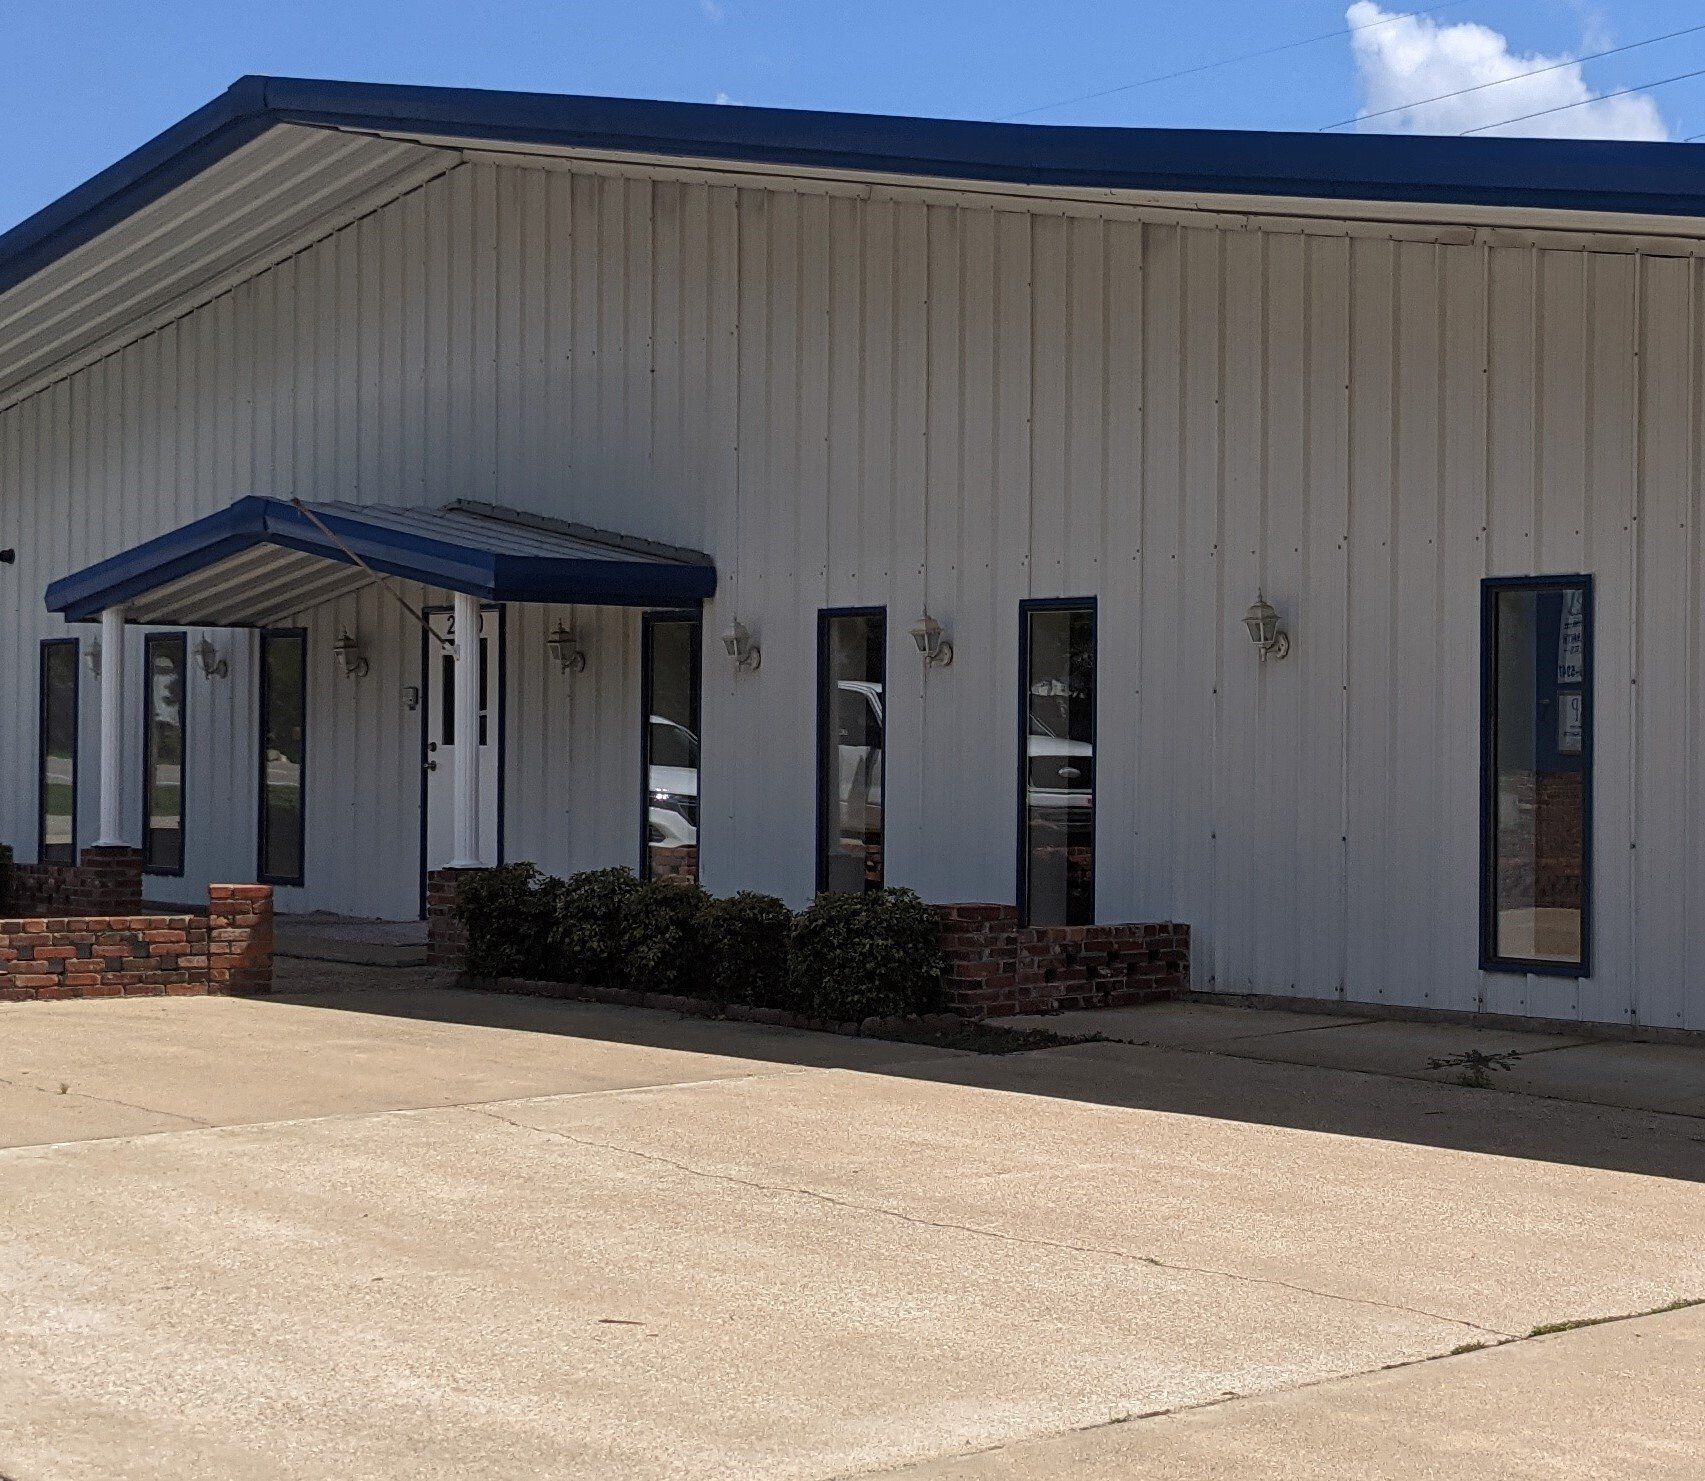 store window tinting in AL - Heat & Bright Sun were out of control inside this office in central Alabama.